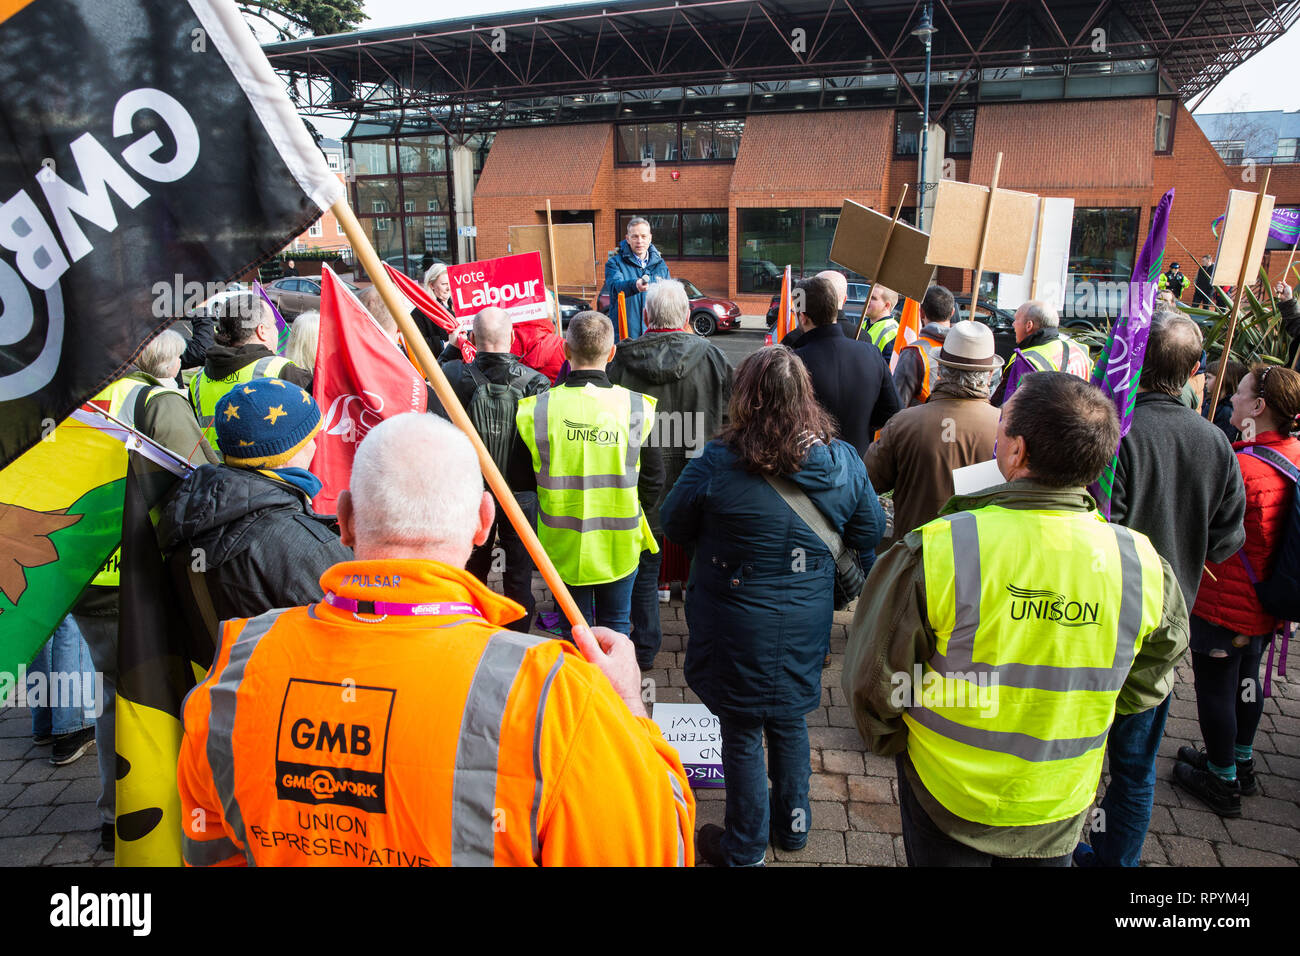 Maidenhead, Berkshire, UK. 23rd February, 2019. Matt Rodda, Labour MP for Reading East, addresses members of the Windsor and Maidenhead branches of the Labour Party and UNISON and GMB trade unions at a protest outside Maidenhead Town Hall in Prime Minister Theresa May's constituency against planned spending cuts of £6.8m to the 2019/2020 budget by the Royal Borough of Windsor and Maidenhead. Over 1,000 people had signed a petition to the council demanding an alternative to the cuts. Credit: Mark Kerrison/Alamy Live News Stock Photo